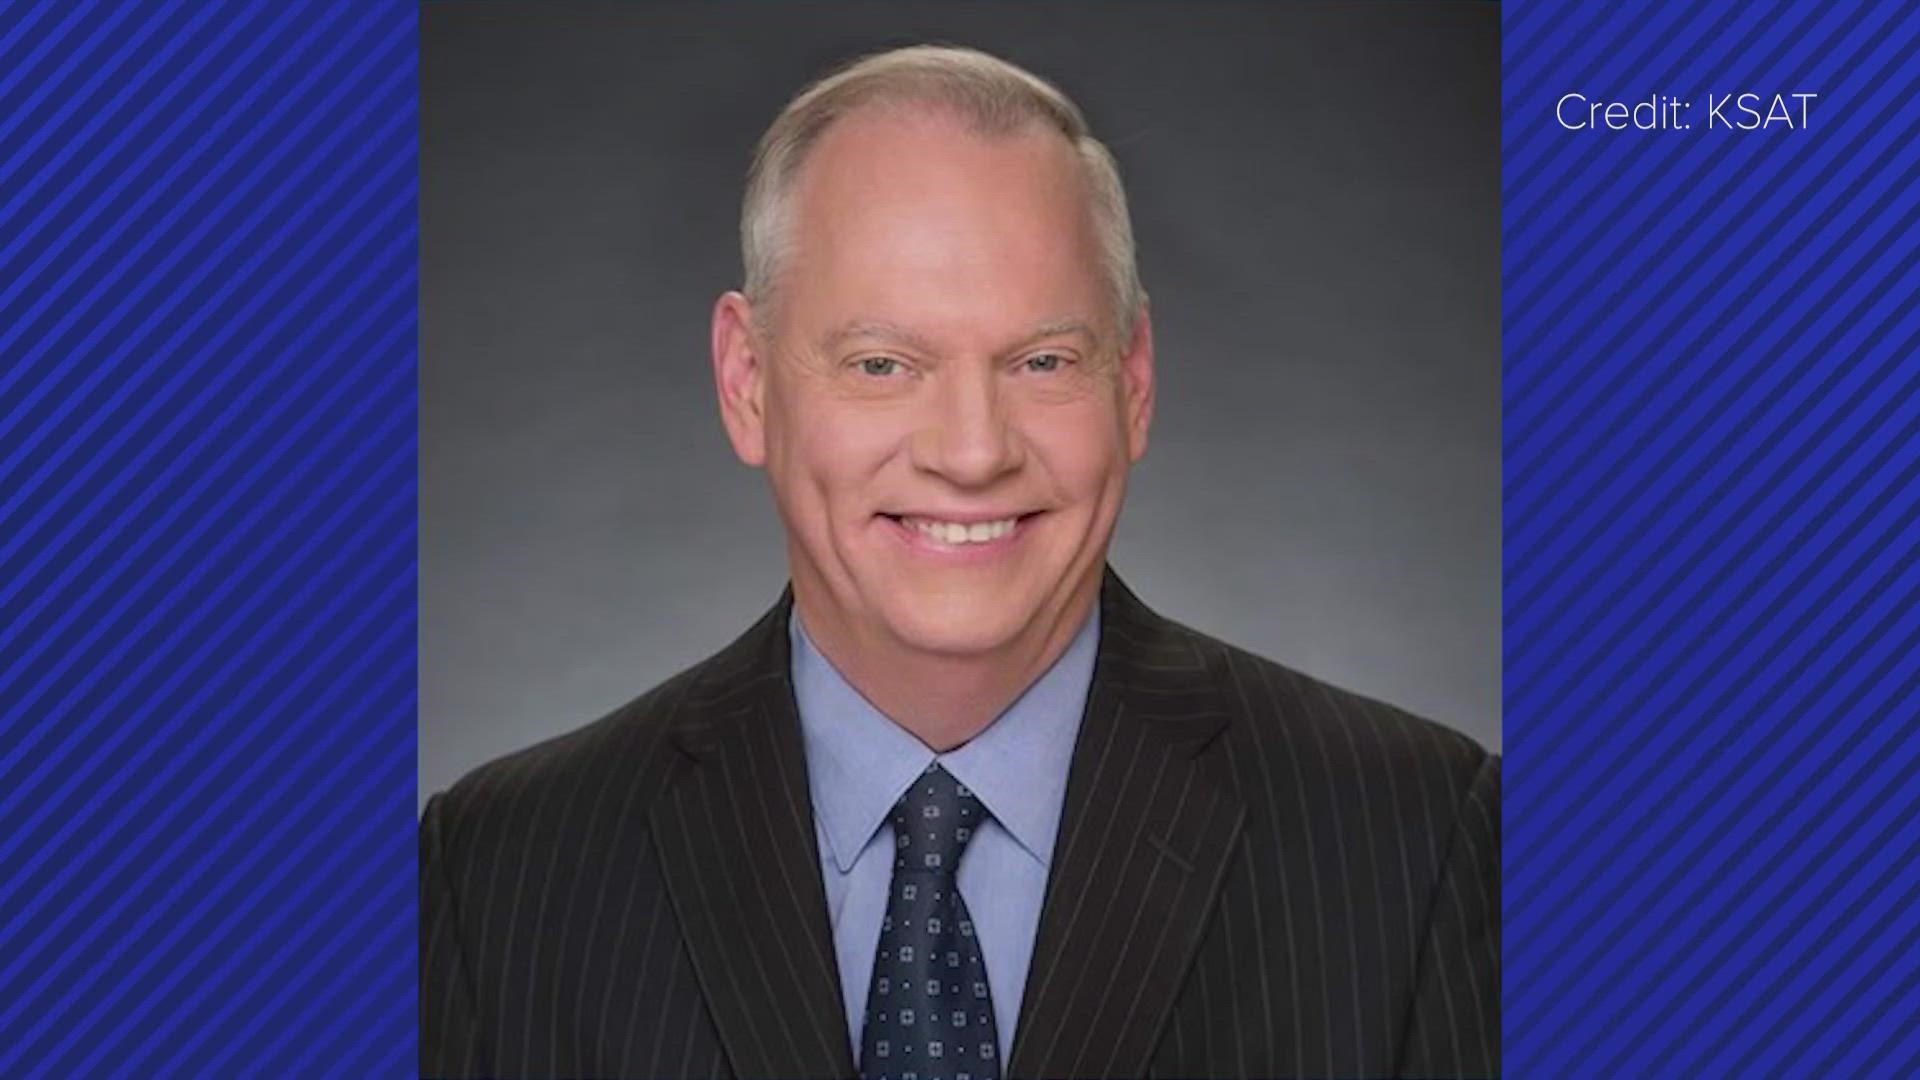 Greg Simmons has worked at KSAT 12 since 1980, according to the station’s website.